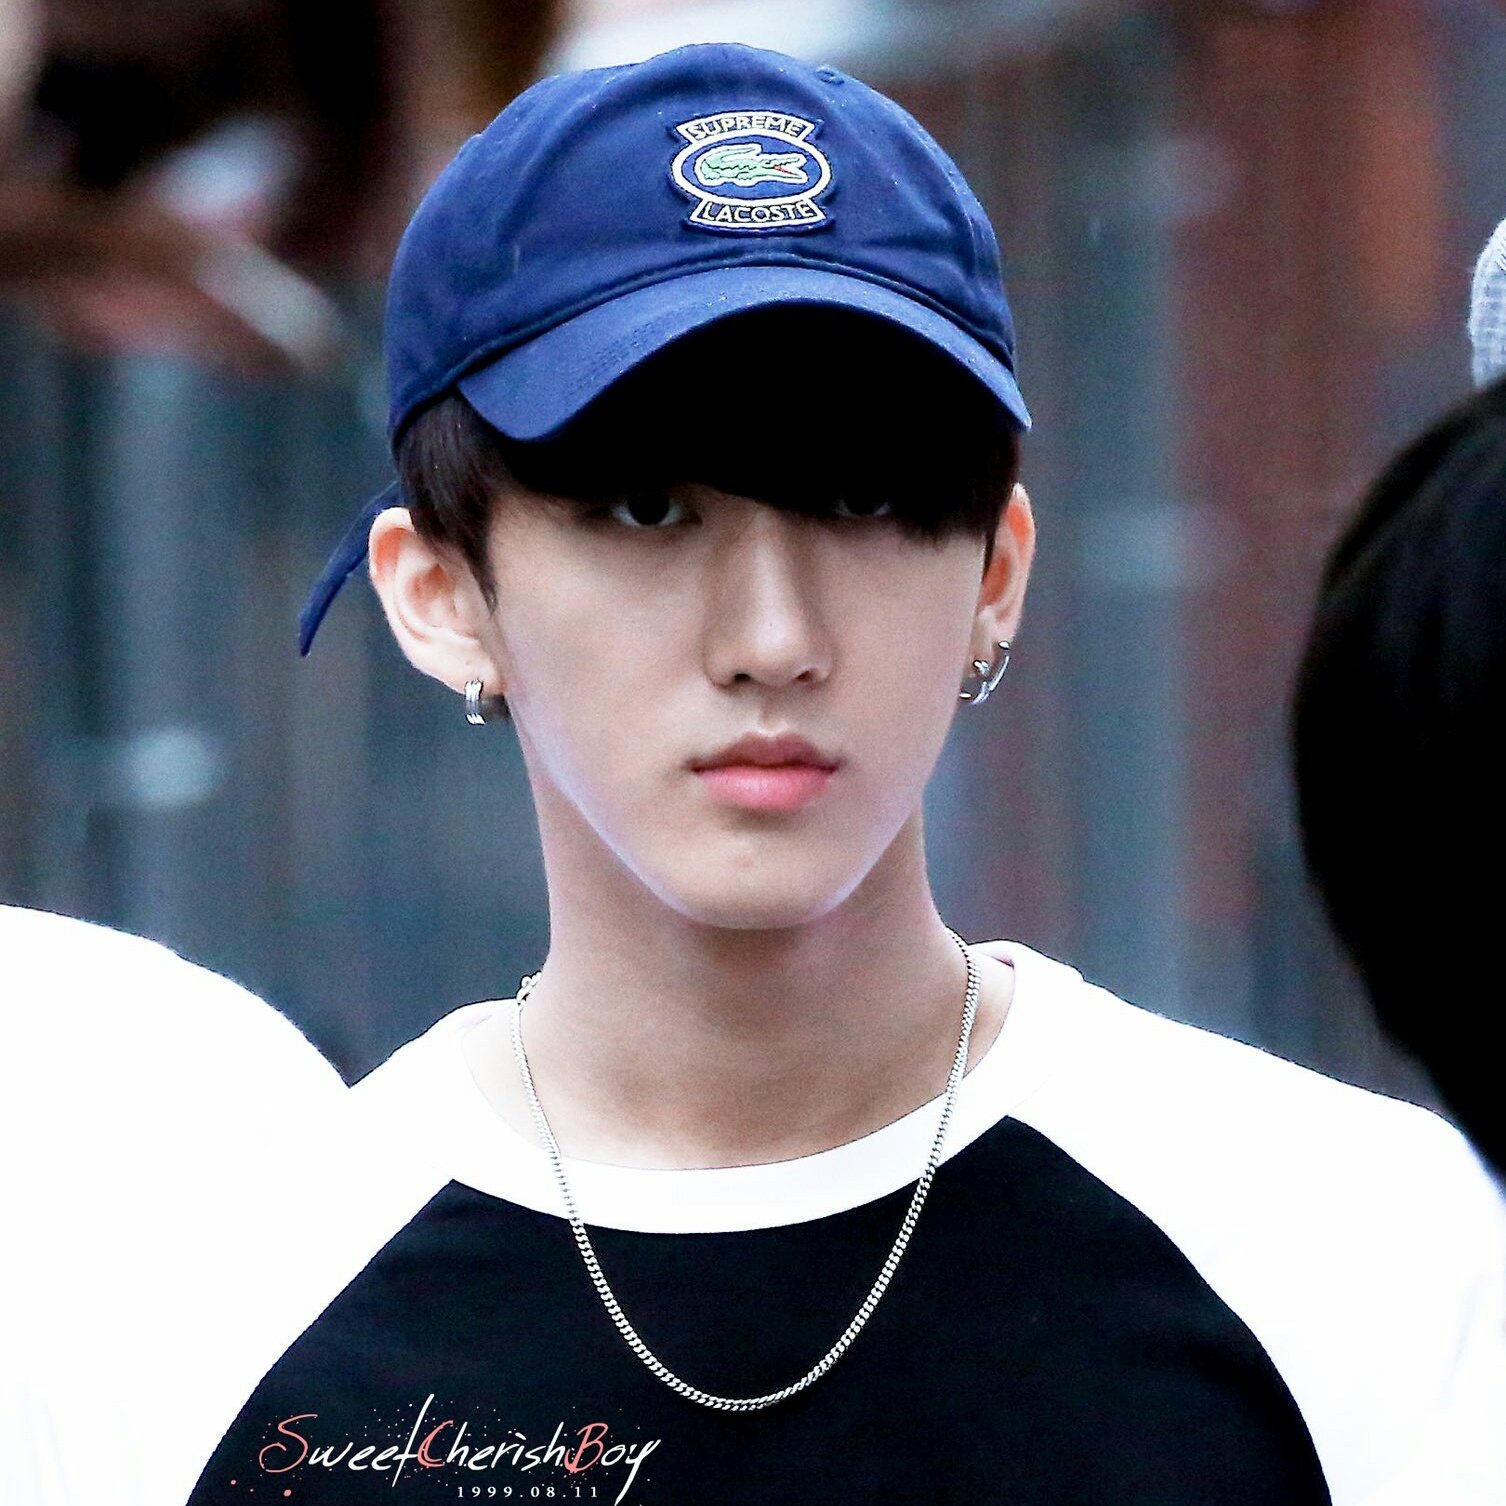 Tidsserier Ret Utilfreds changlix pics on X: "who has done more for the rap industry? rt for seo  changbin like for eminem https://t.co/wfBEO5Xj09" / X